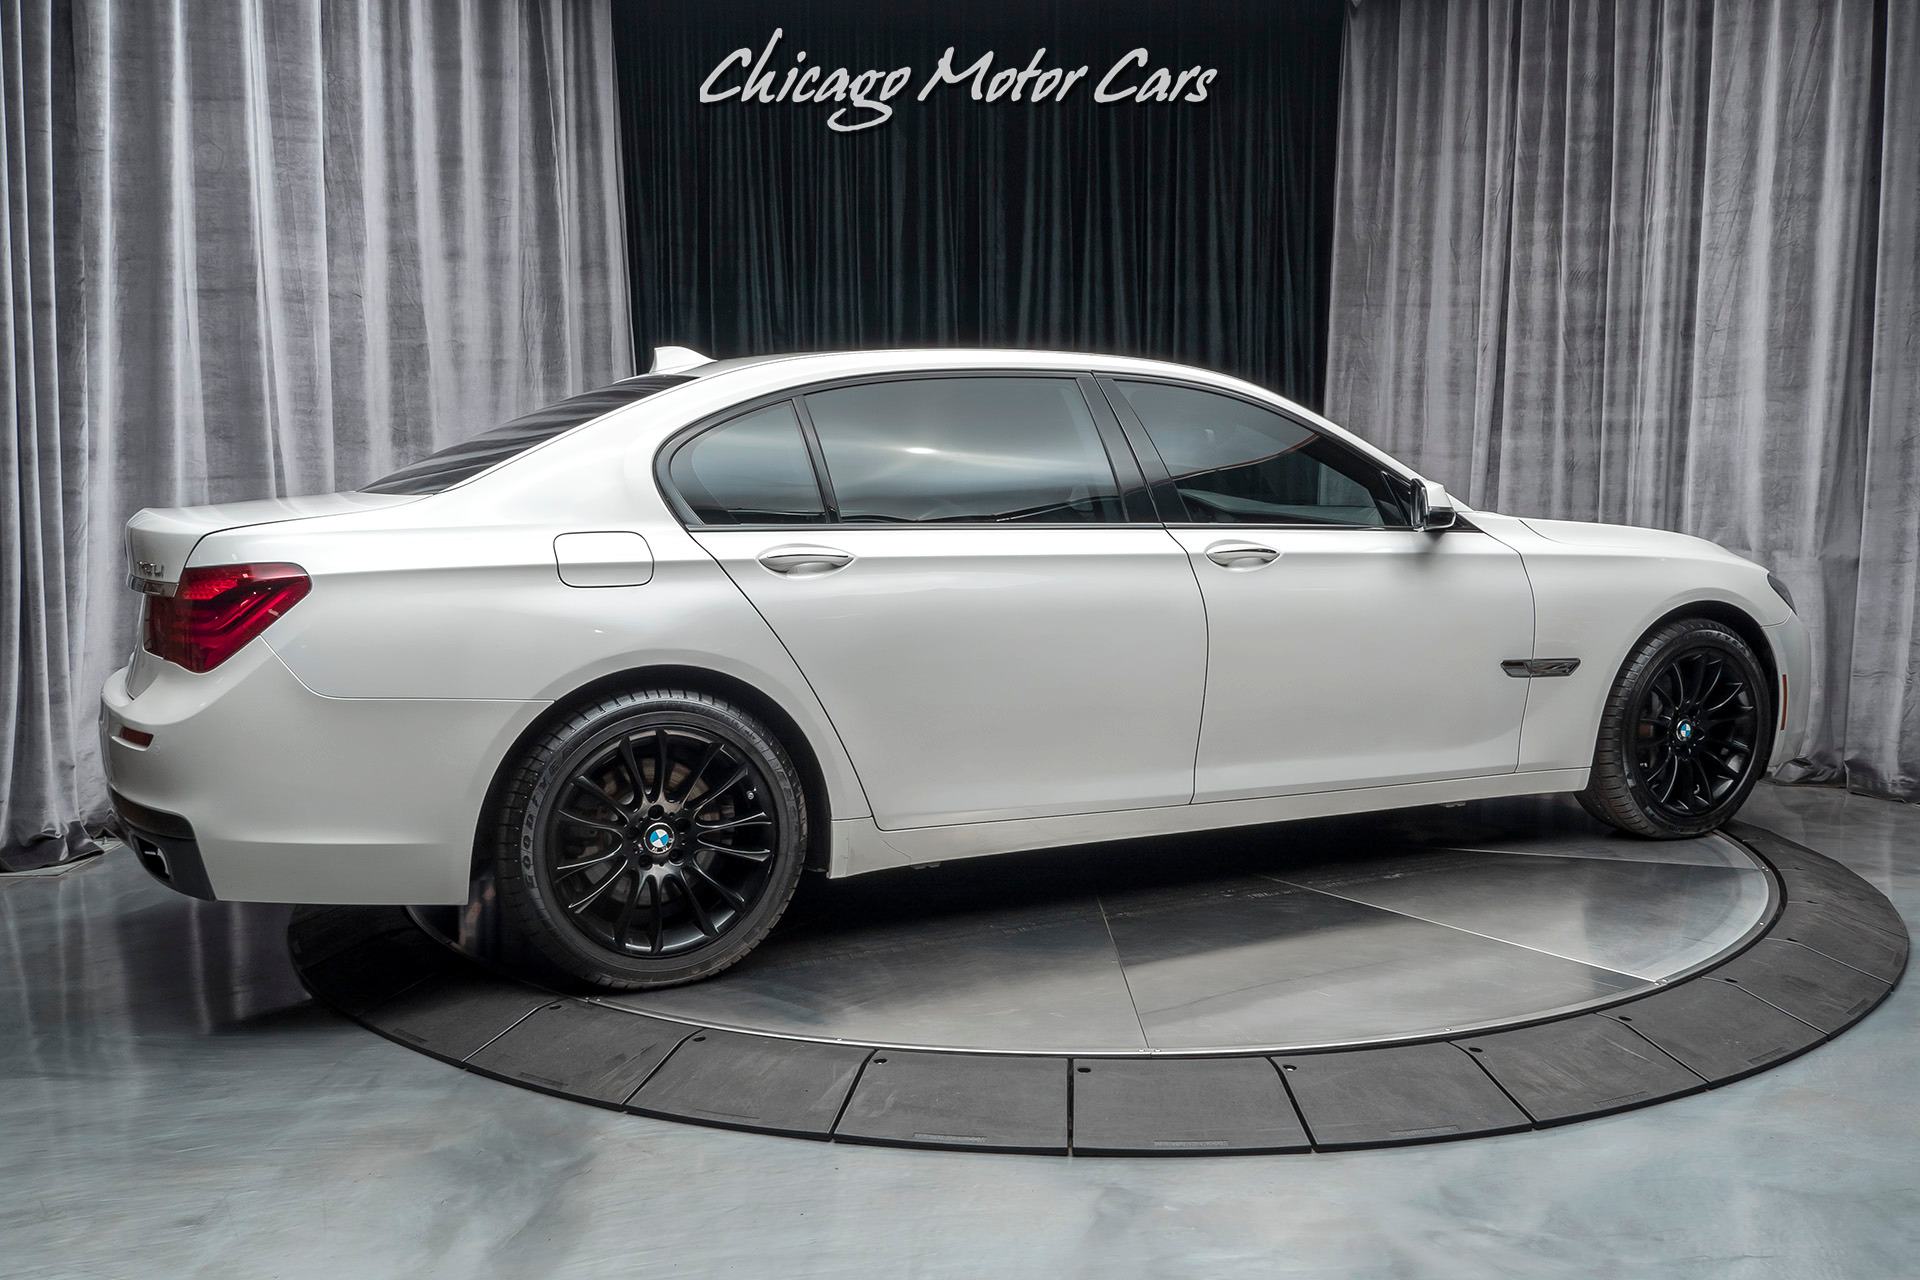 Used 2013 BMW 740Li xDrive AWD Sedan MSRP $92K+ EXECUTIVE PACKAGE! For Sale  (Special Pricing) | Chicago Motor Cars Stock #16686